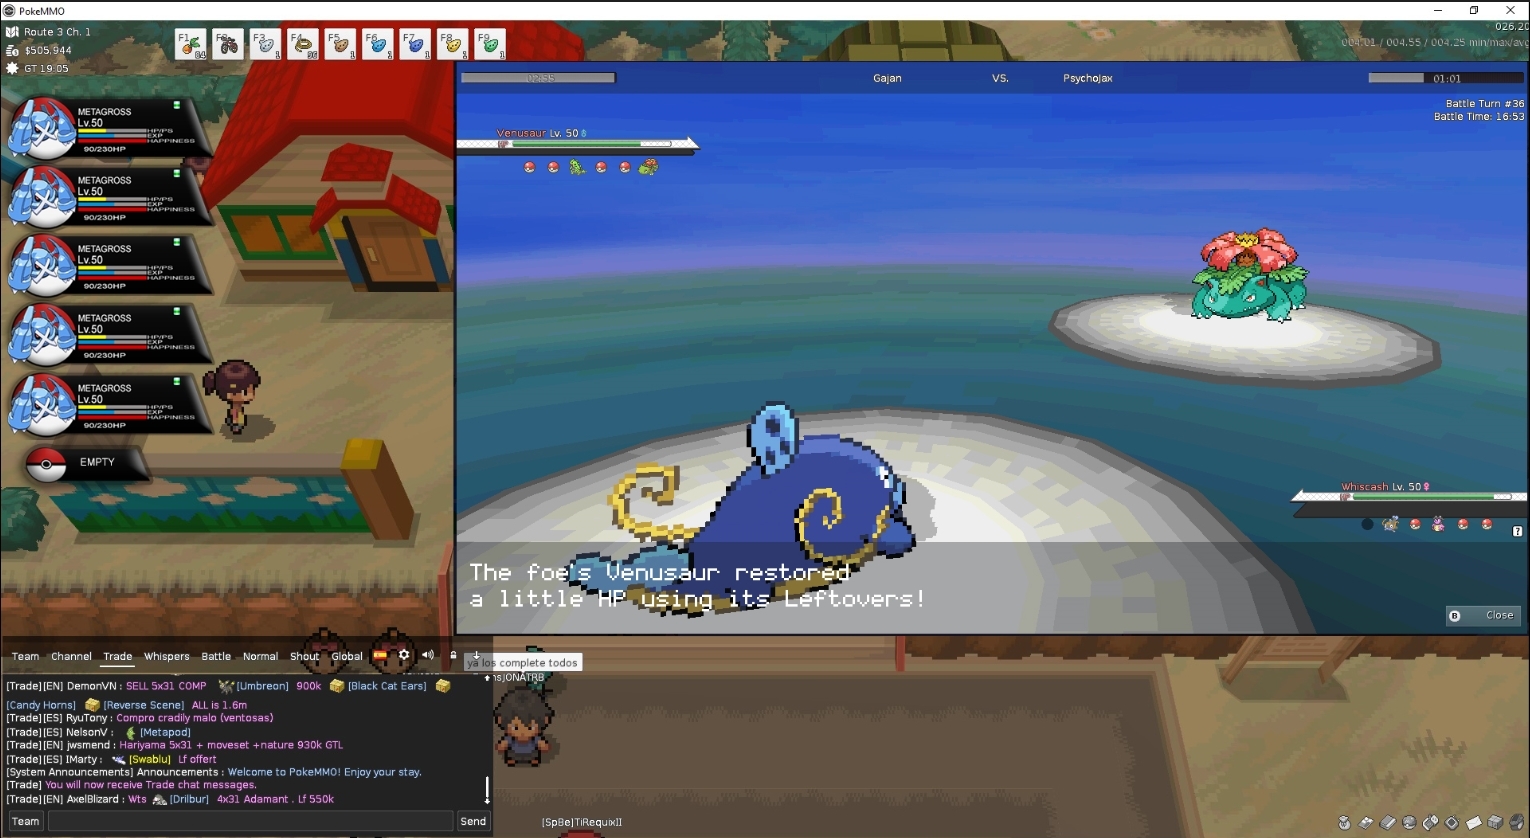 multiple chat boxes at once - Suggestion Box - PokeMMO